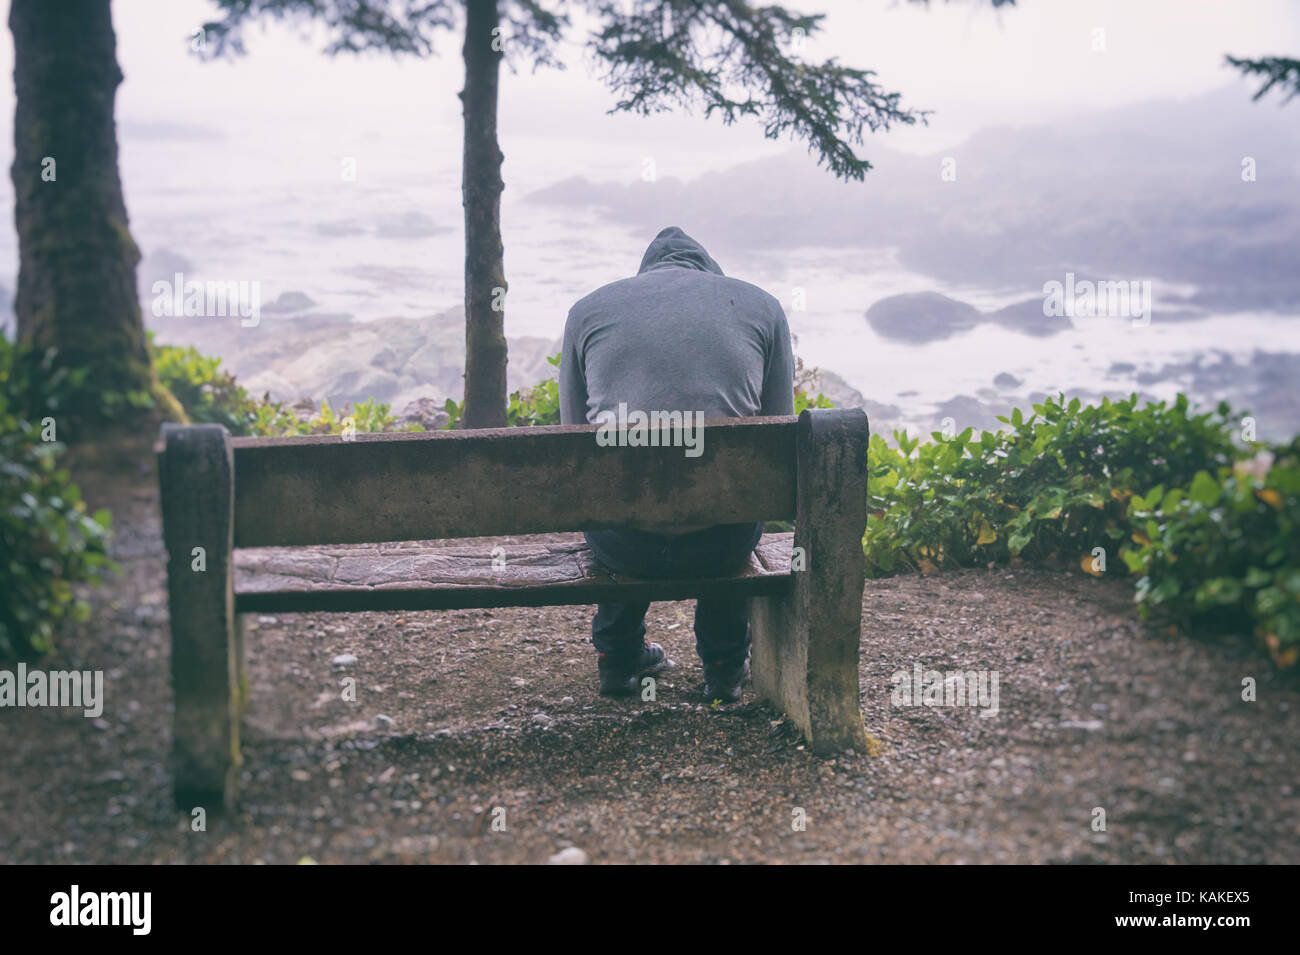 sad-and-lonely-man-sitting-on-bench-overlooking-sea-on-vancouver-island-KAKEX5.jpg